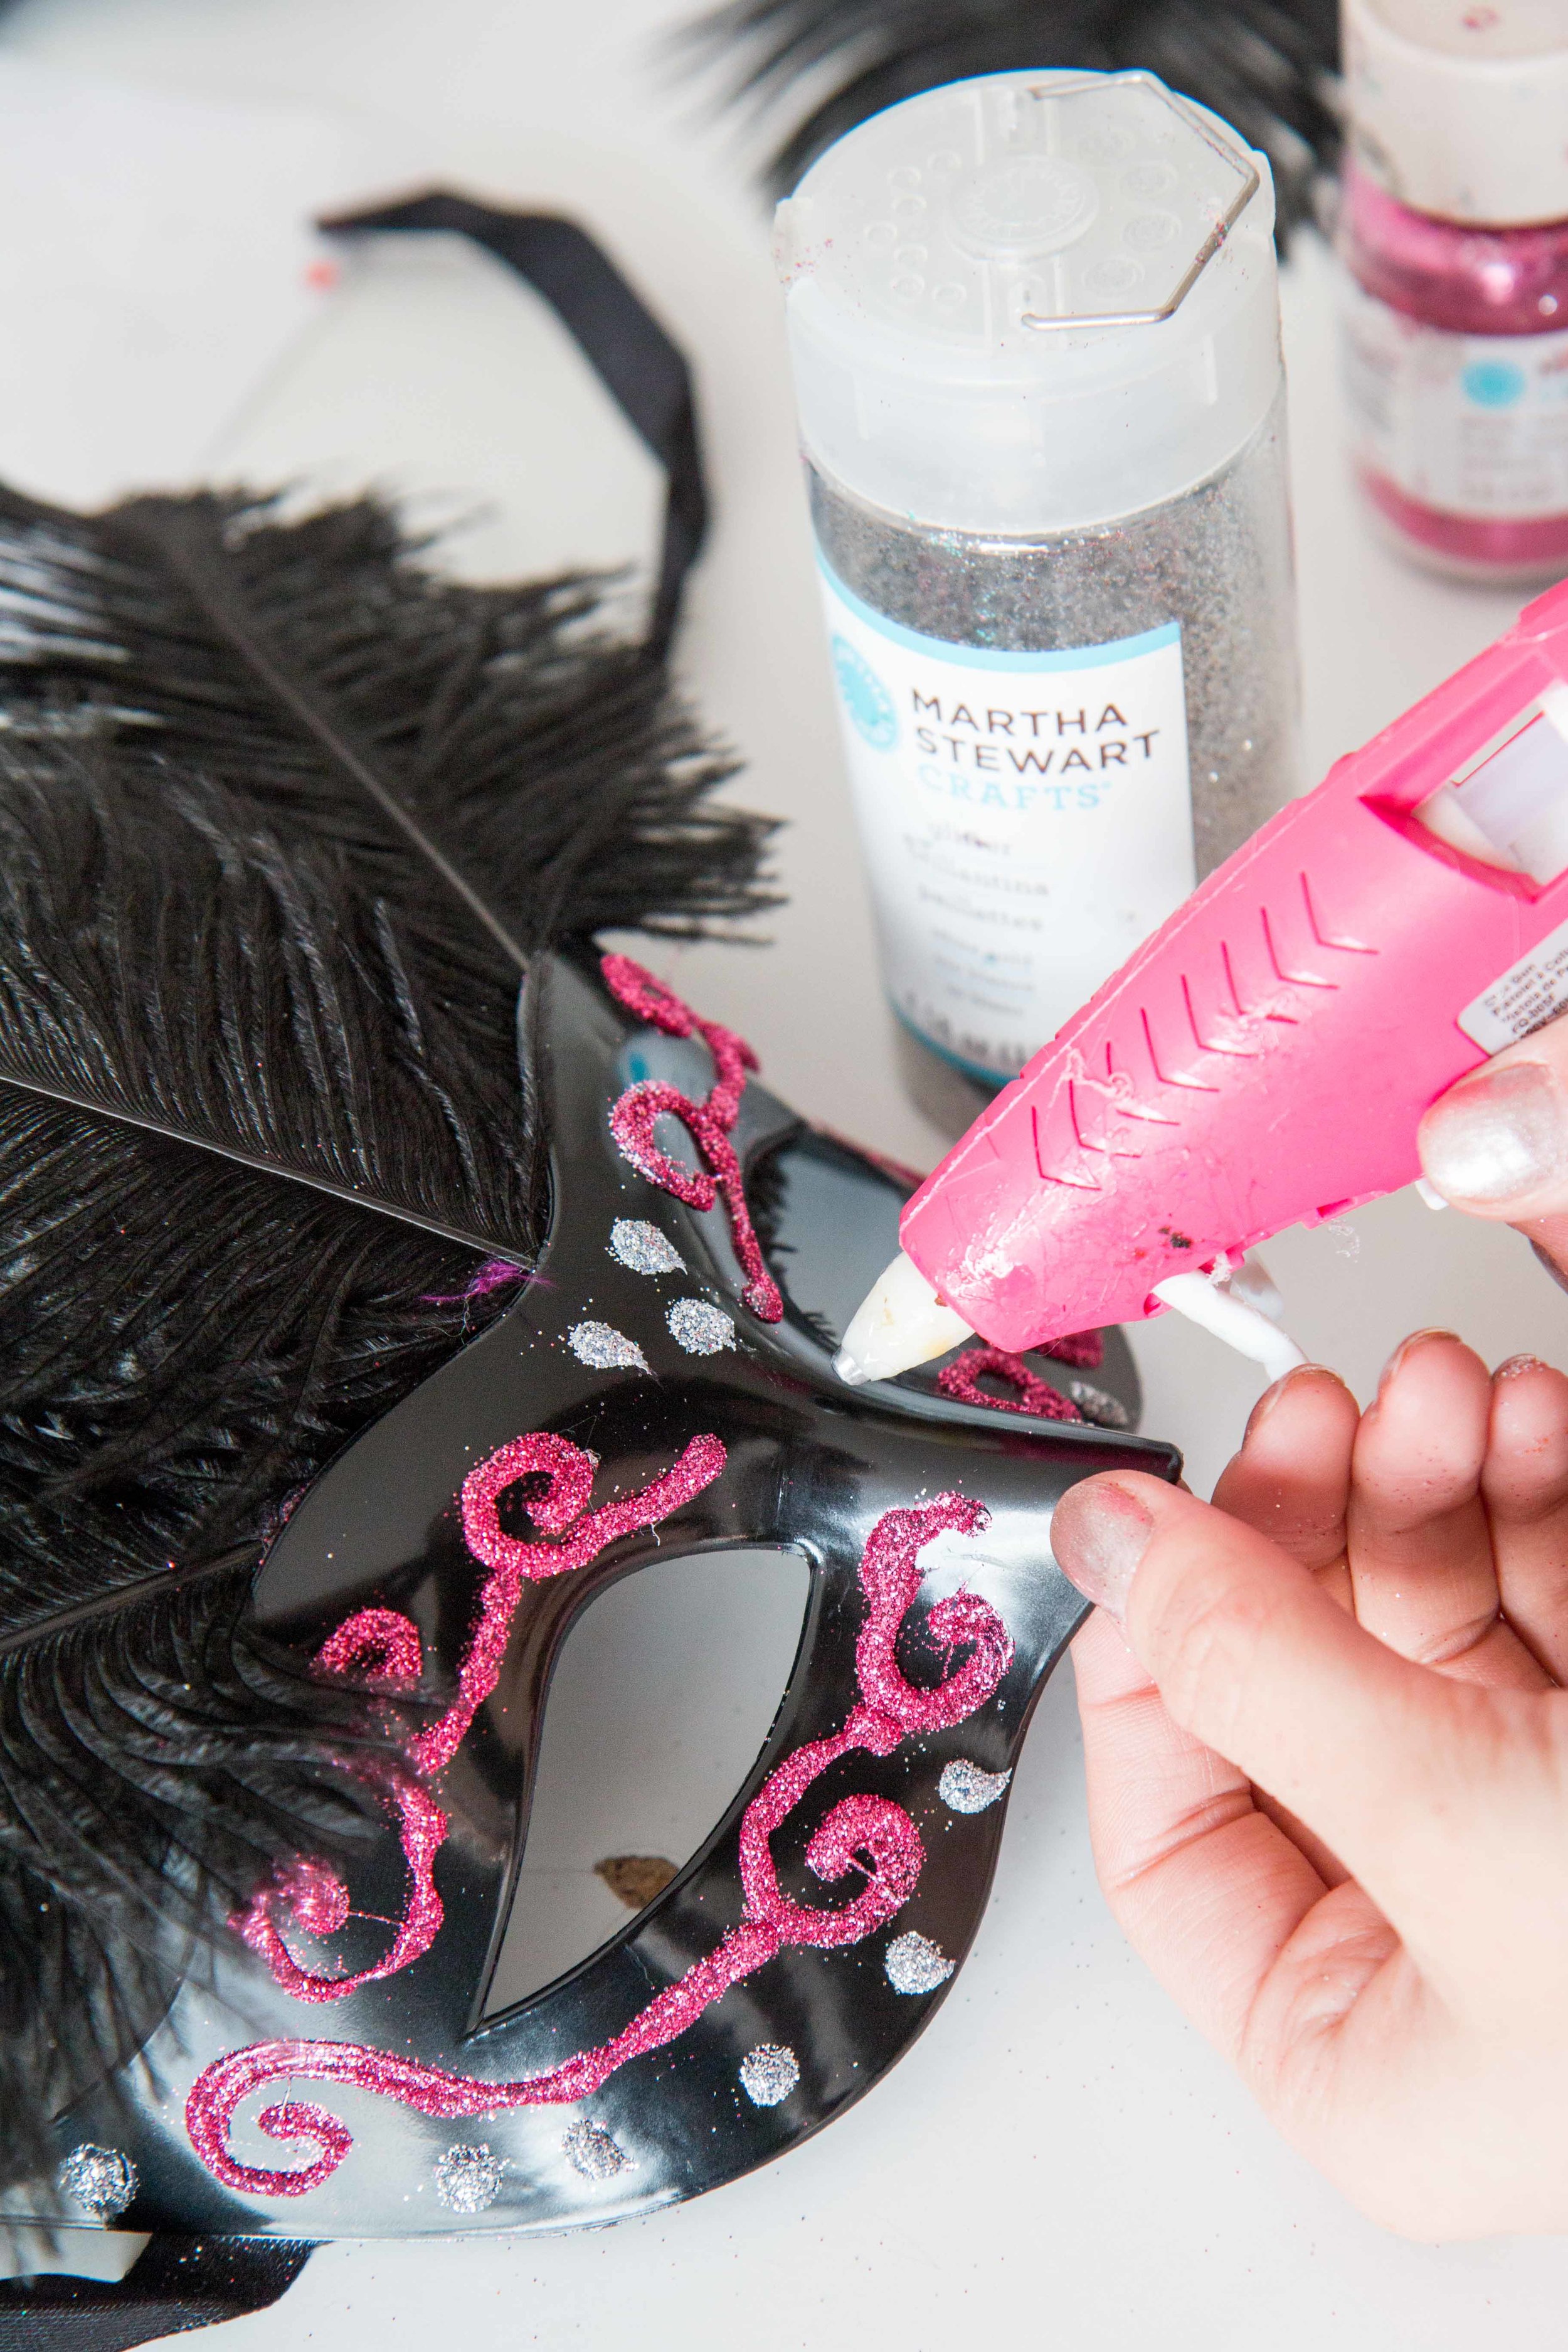 Feather Up for Some Feather Mask Fun!